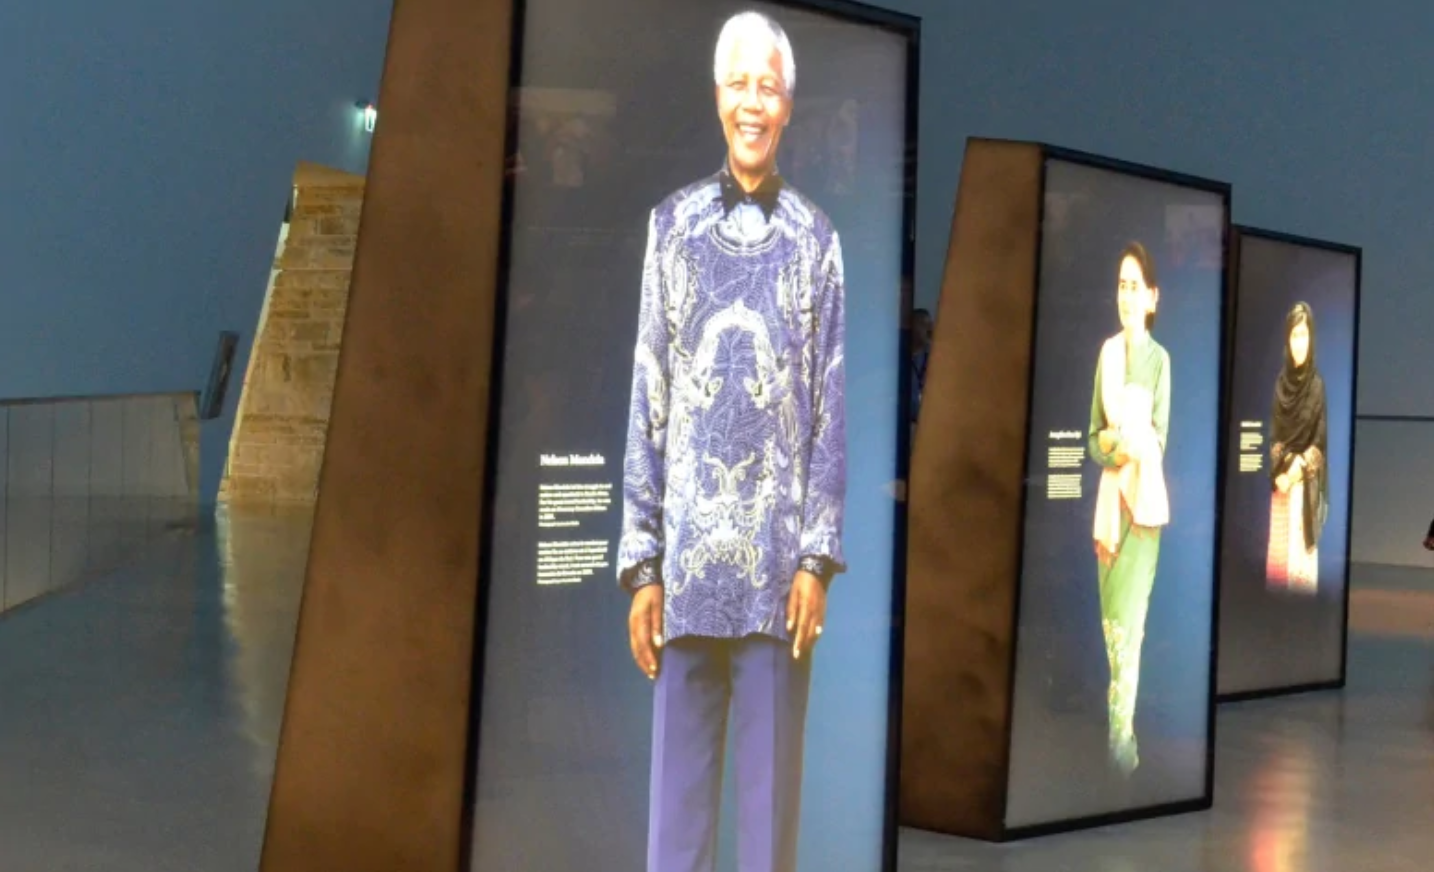 Aung San Suu Kyi is featured in the Turning Points for Humanity exhibit at the Canadian Museum for Human Rights alongside Nelson Mandela and Malala Yousafzai. Photo: Canadian Museum for Human Rights